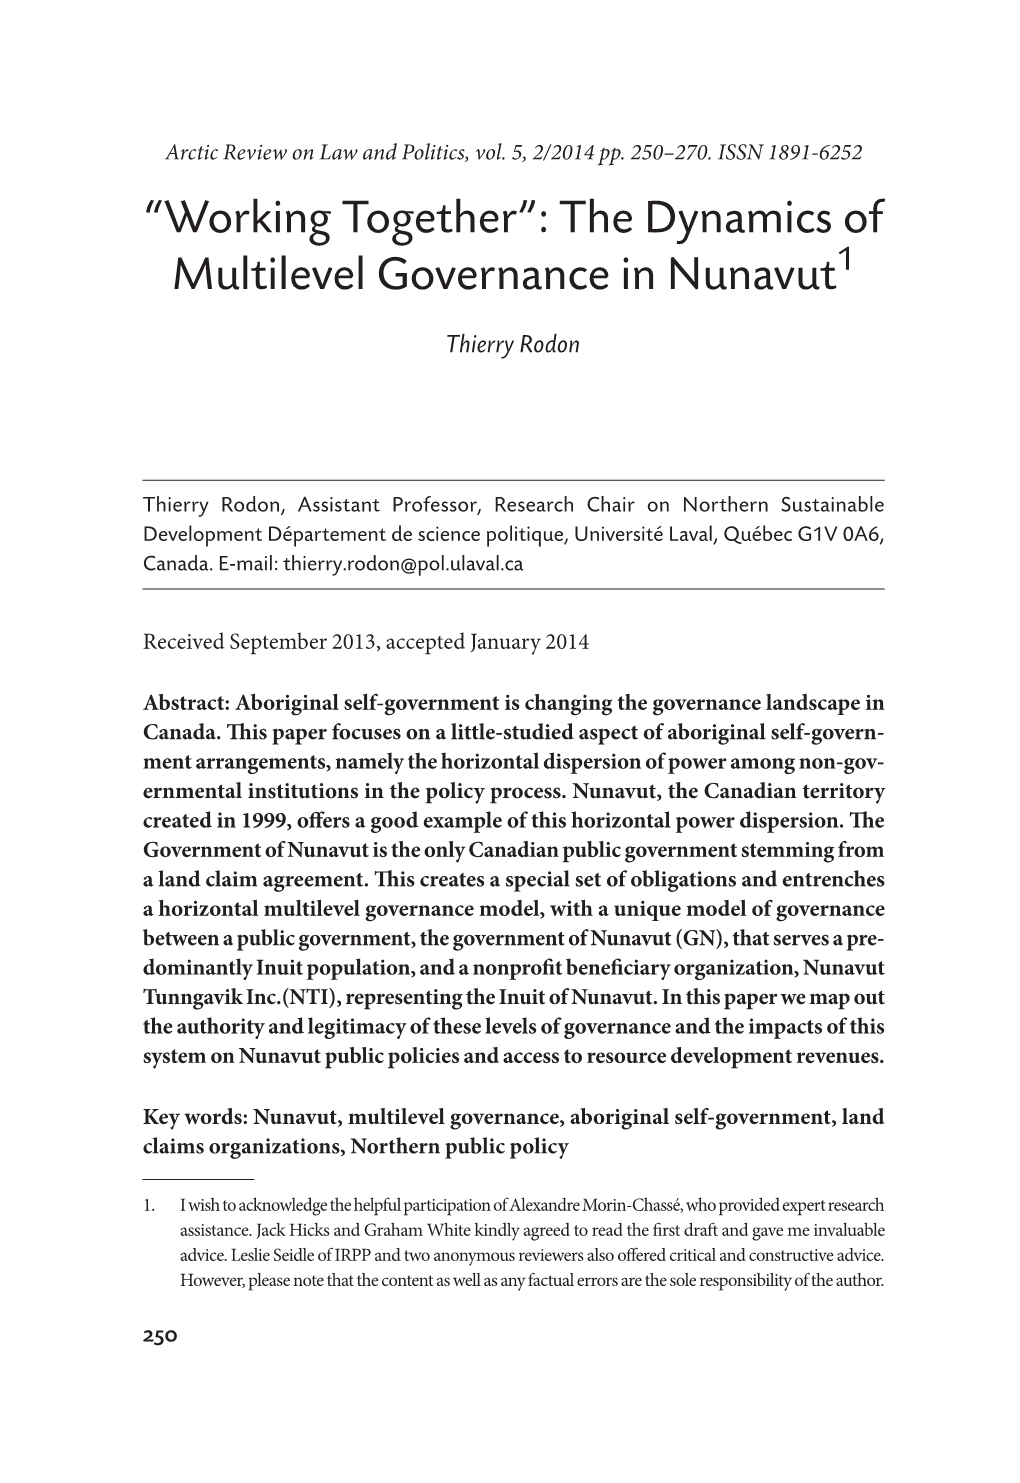 “Working Together”: the Dynamics of Multilevel Governance in Nunavut1